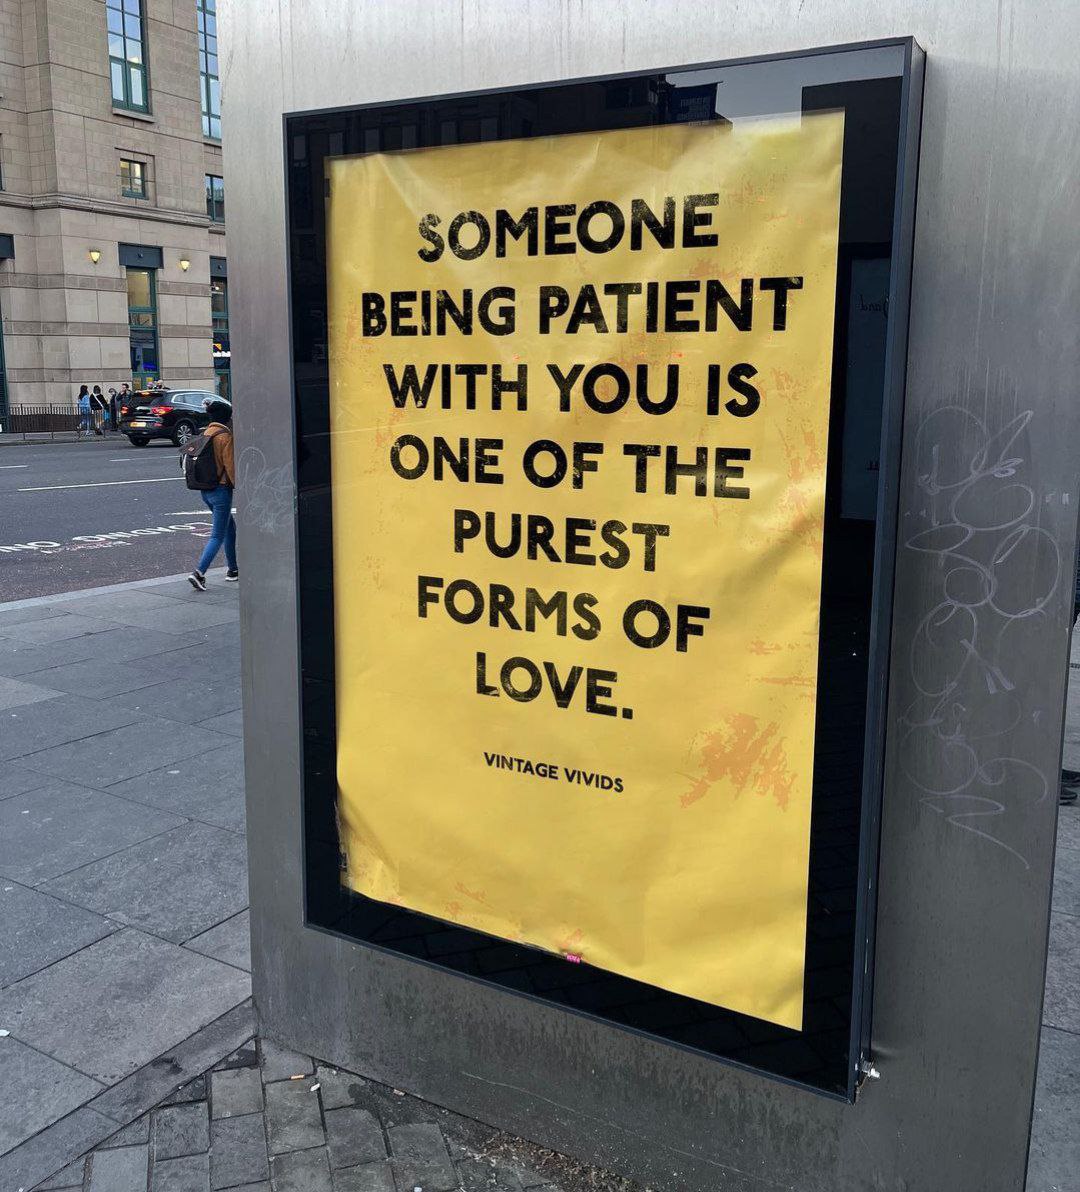 Someone being patient with you is one of the purest forms of #love.